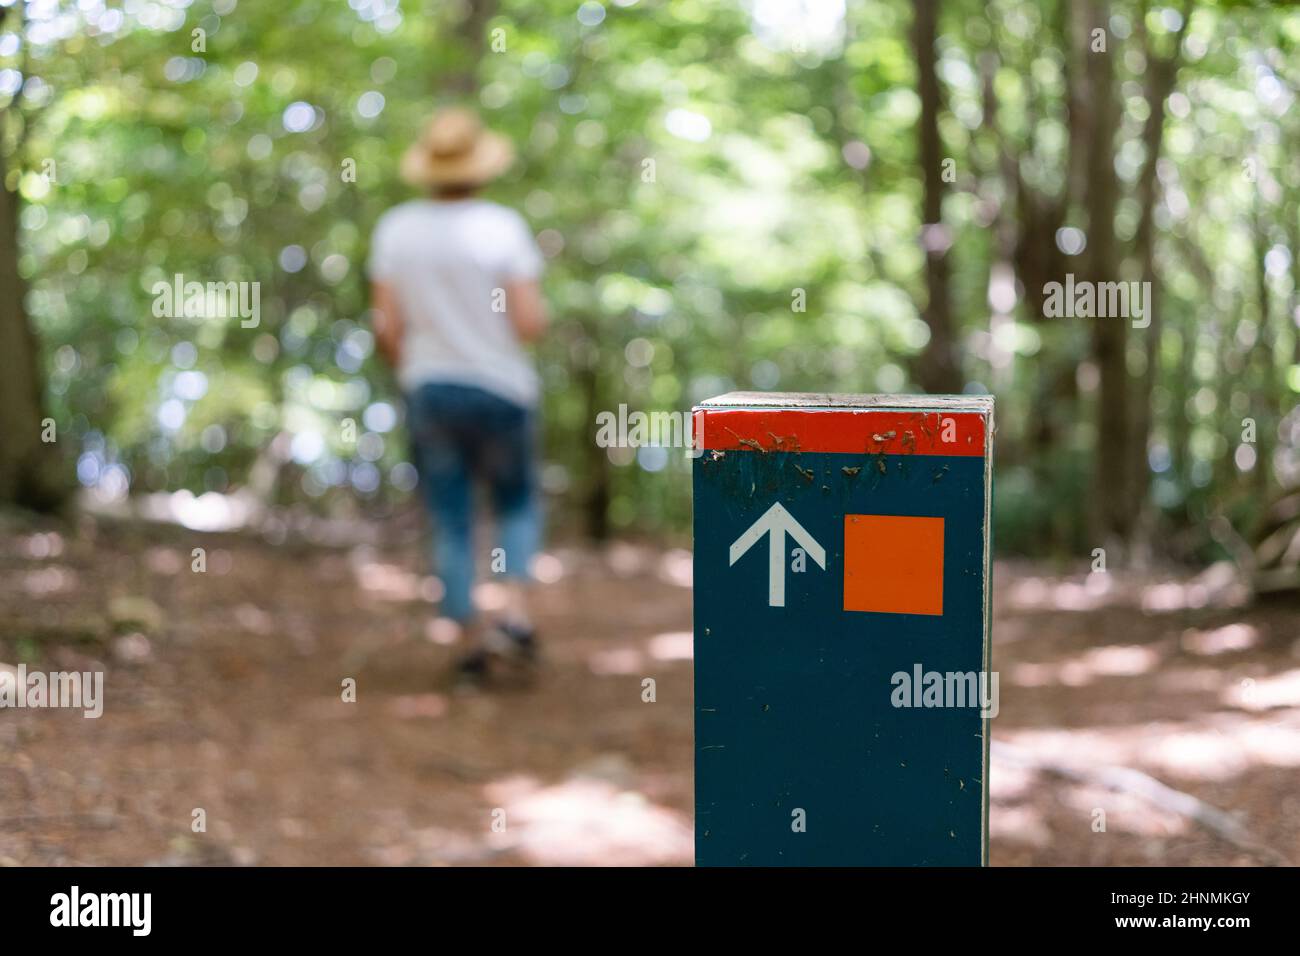 Signpost on a trail in a sunny forest with woman walking in the blurry background Stock Photo